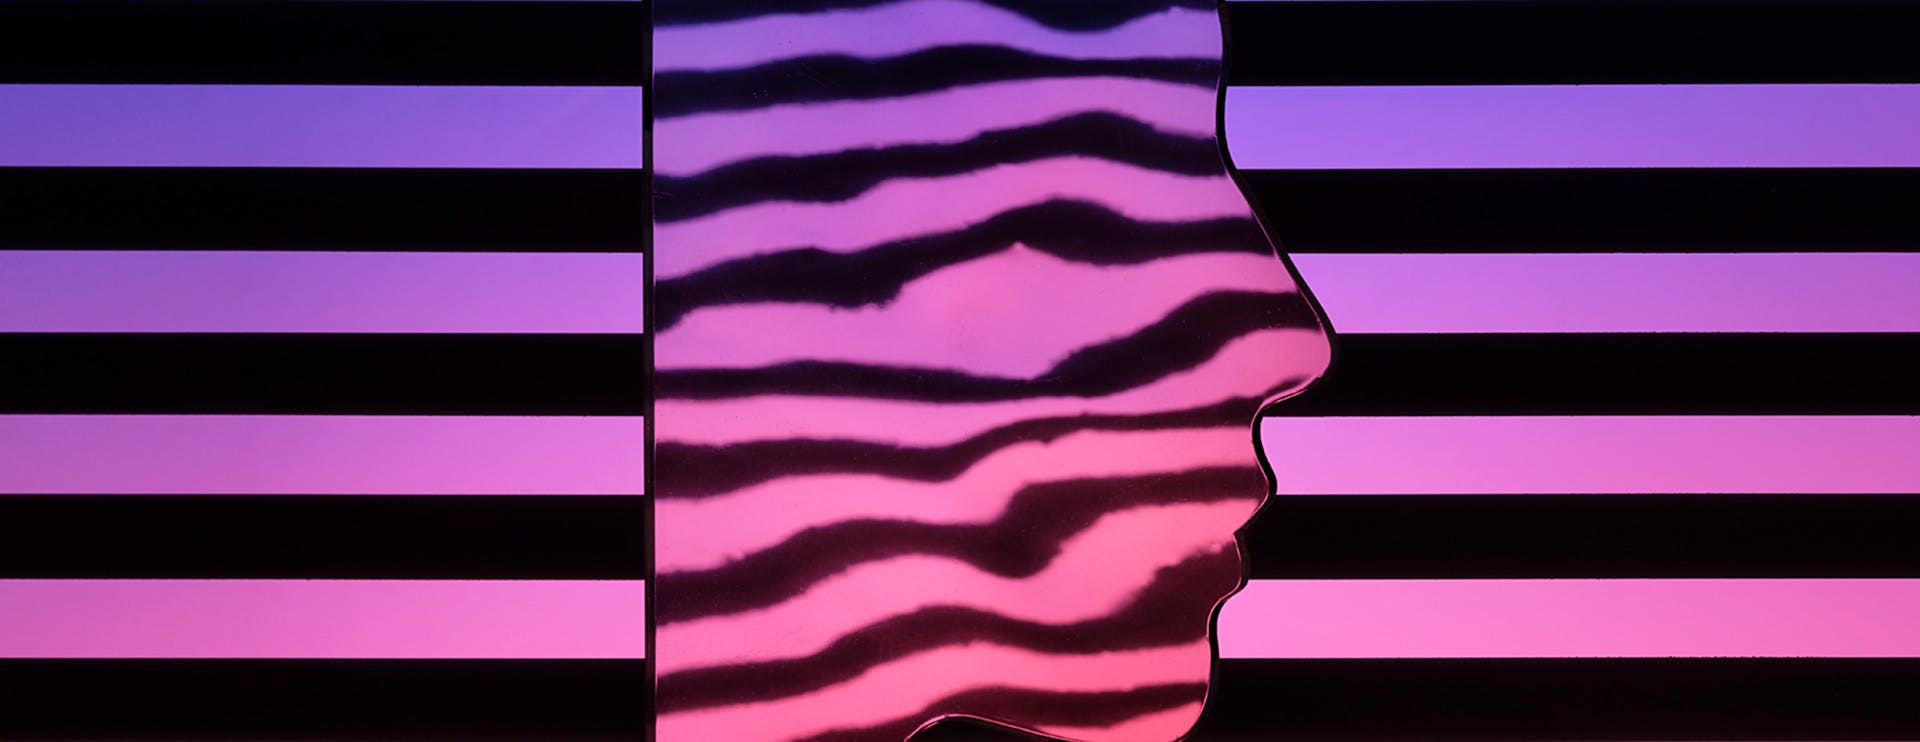 Graphic shows a black and magenta horizontal stripe design with the silhouette of a face embedded at the centre